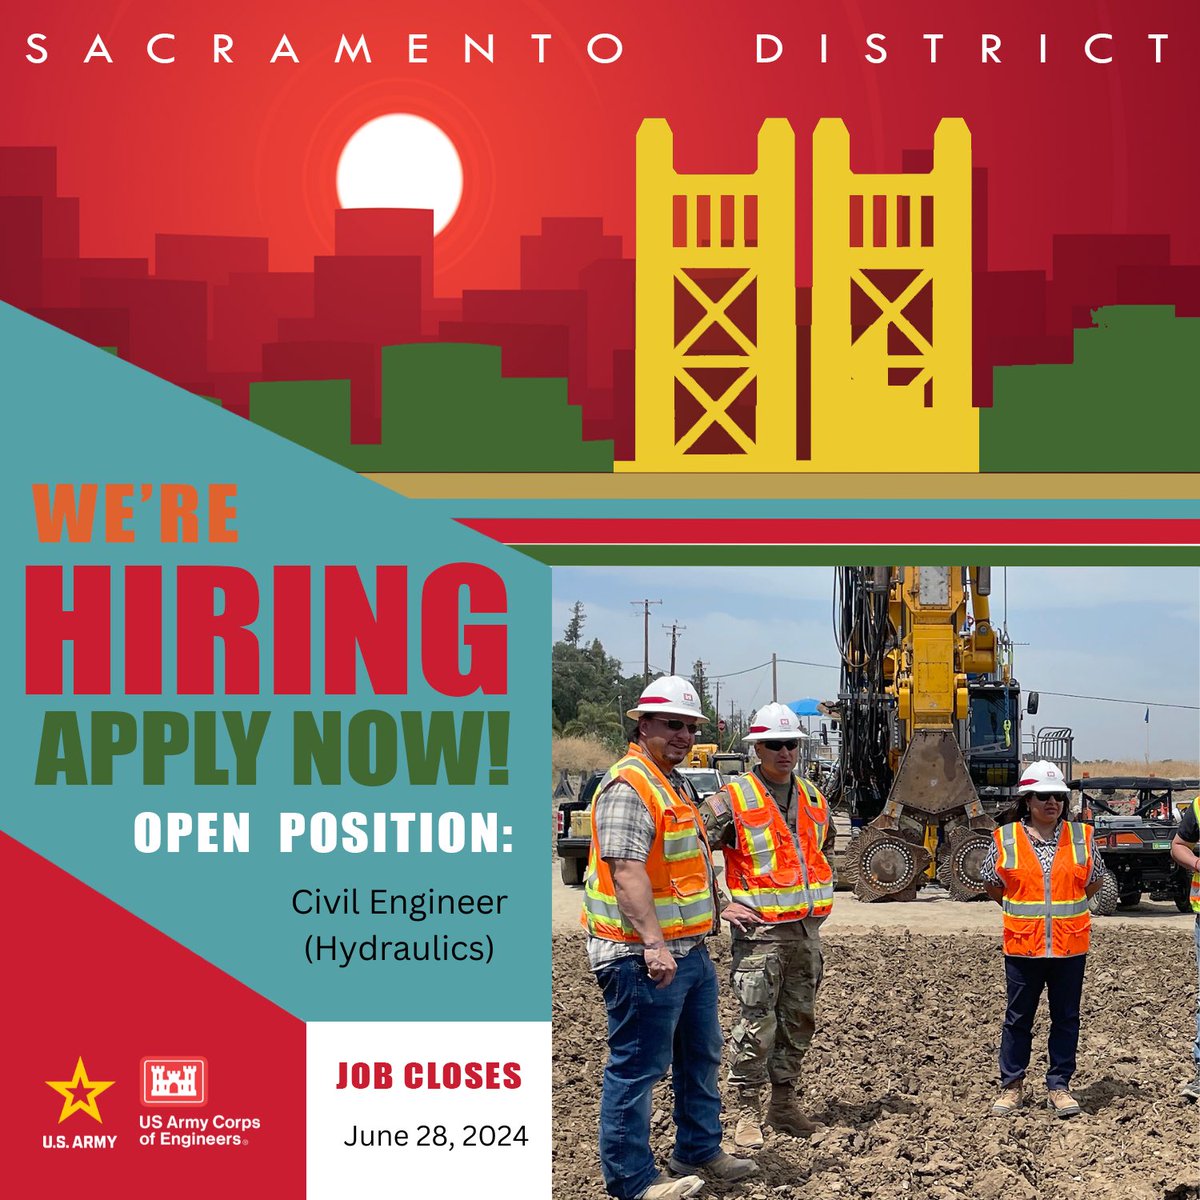 Join our team as a Civil Engineer in our Hydraulics section. With this role, you'll lead project teams, apply extensive hydraulic engineering knowledge, and oversee the development for a variety of projects. To learn more, visit: usajobs.gov/job/782972800